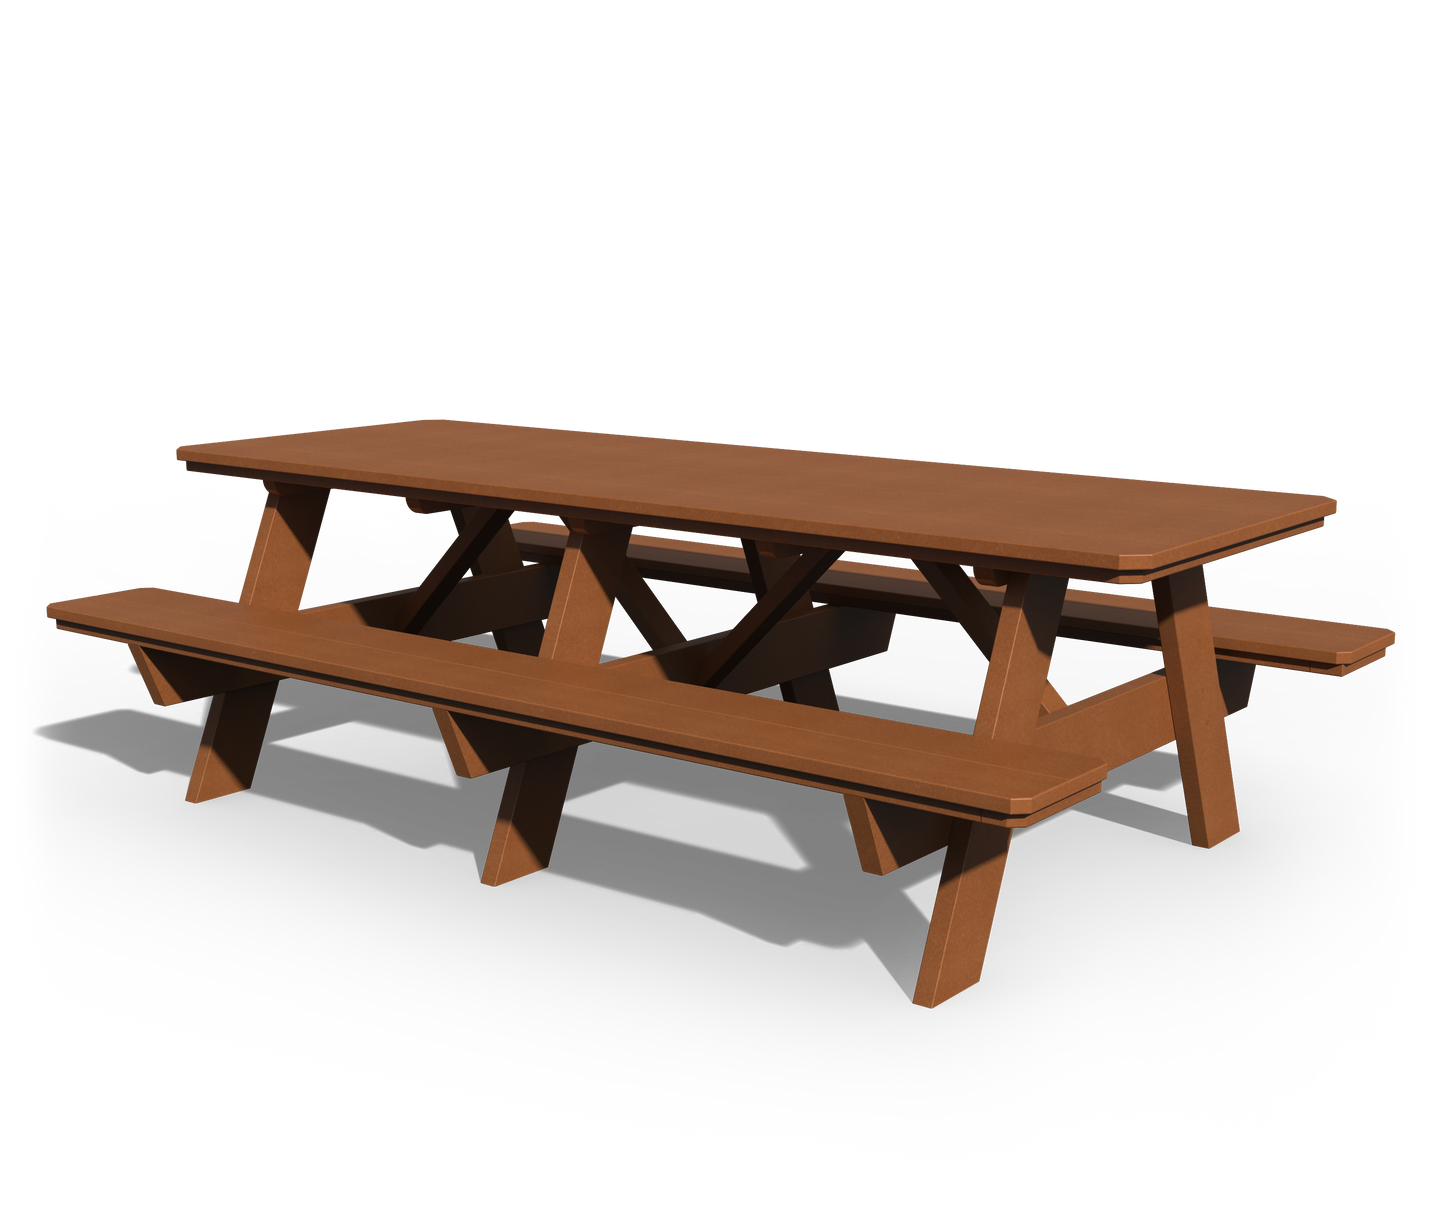 Patiova Recycled Plastic 3'x8' Picnic Table with Seats Attached - LEAD TIME TO SHIP 4 WEEKS